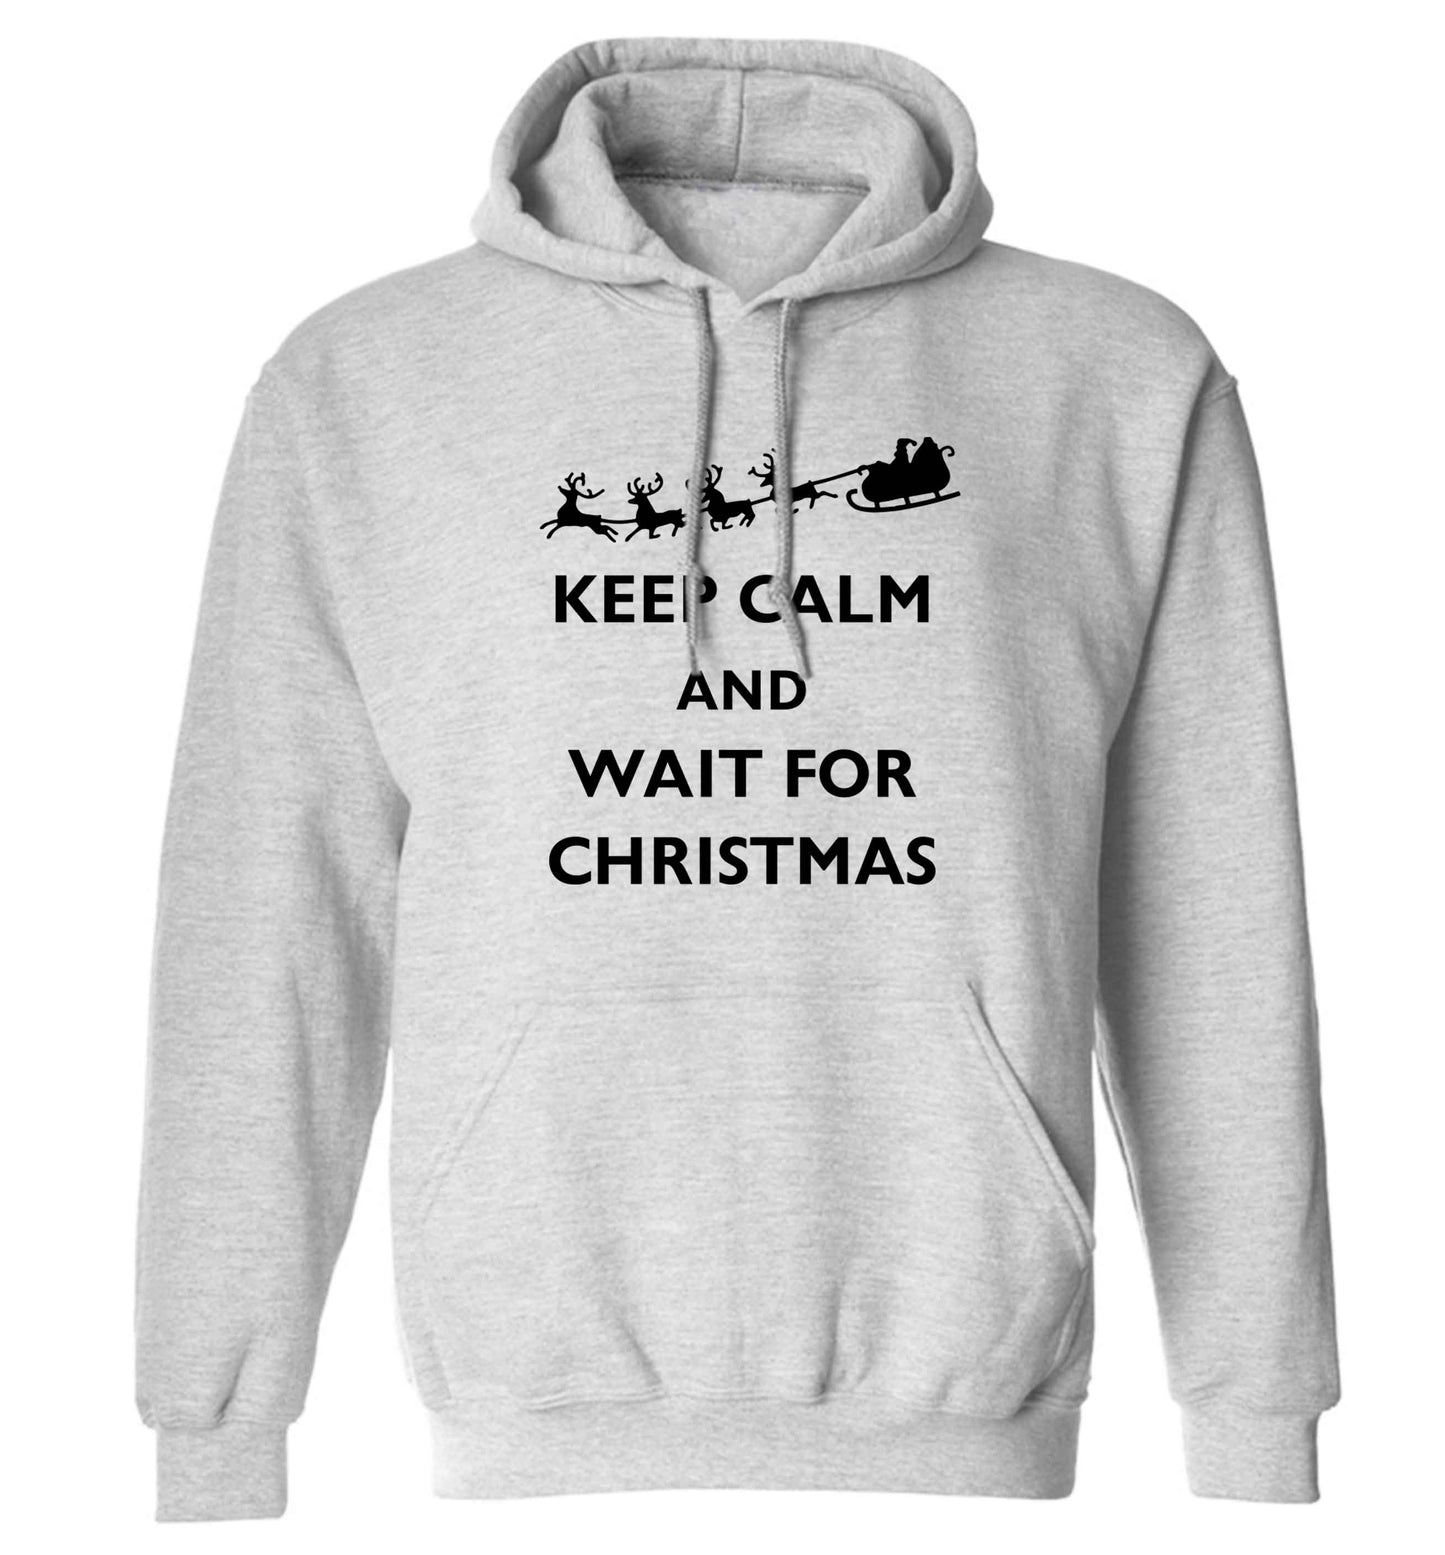 Keep calm and wait for Christmas adults unisex grey hoodie 2XL